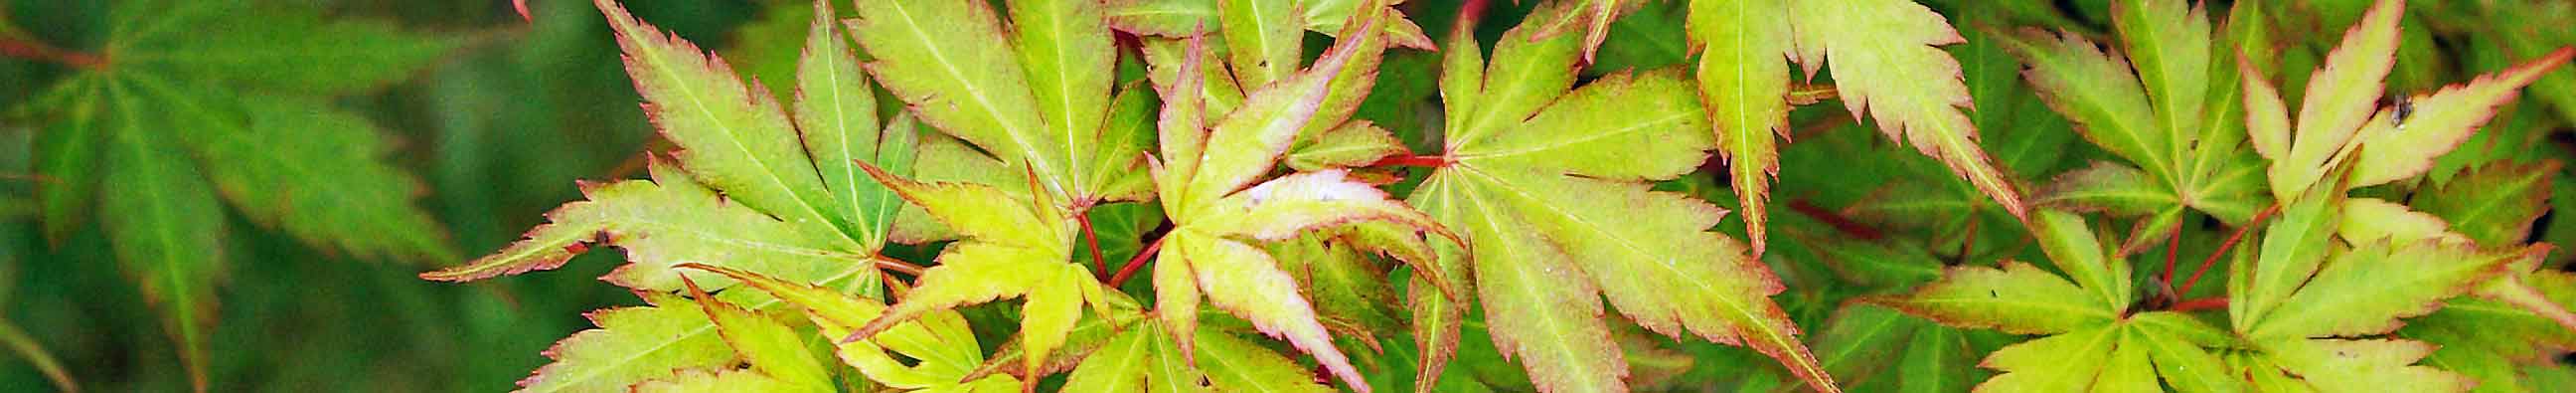 The delicate, deeply lobed, soft yellow-green leaves of Acer palmatum ‘Sango-kaku’, tinged with pink-red in an early autumn garden border